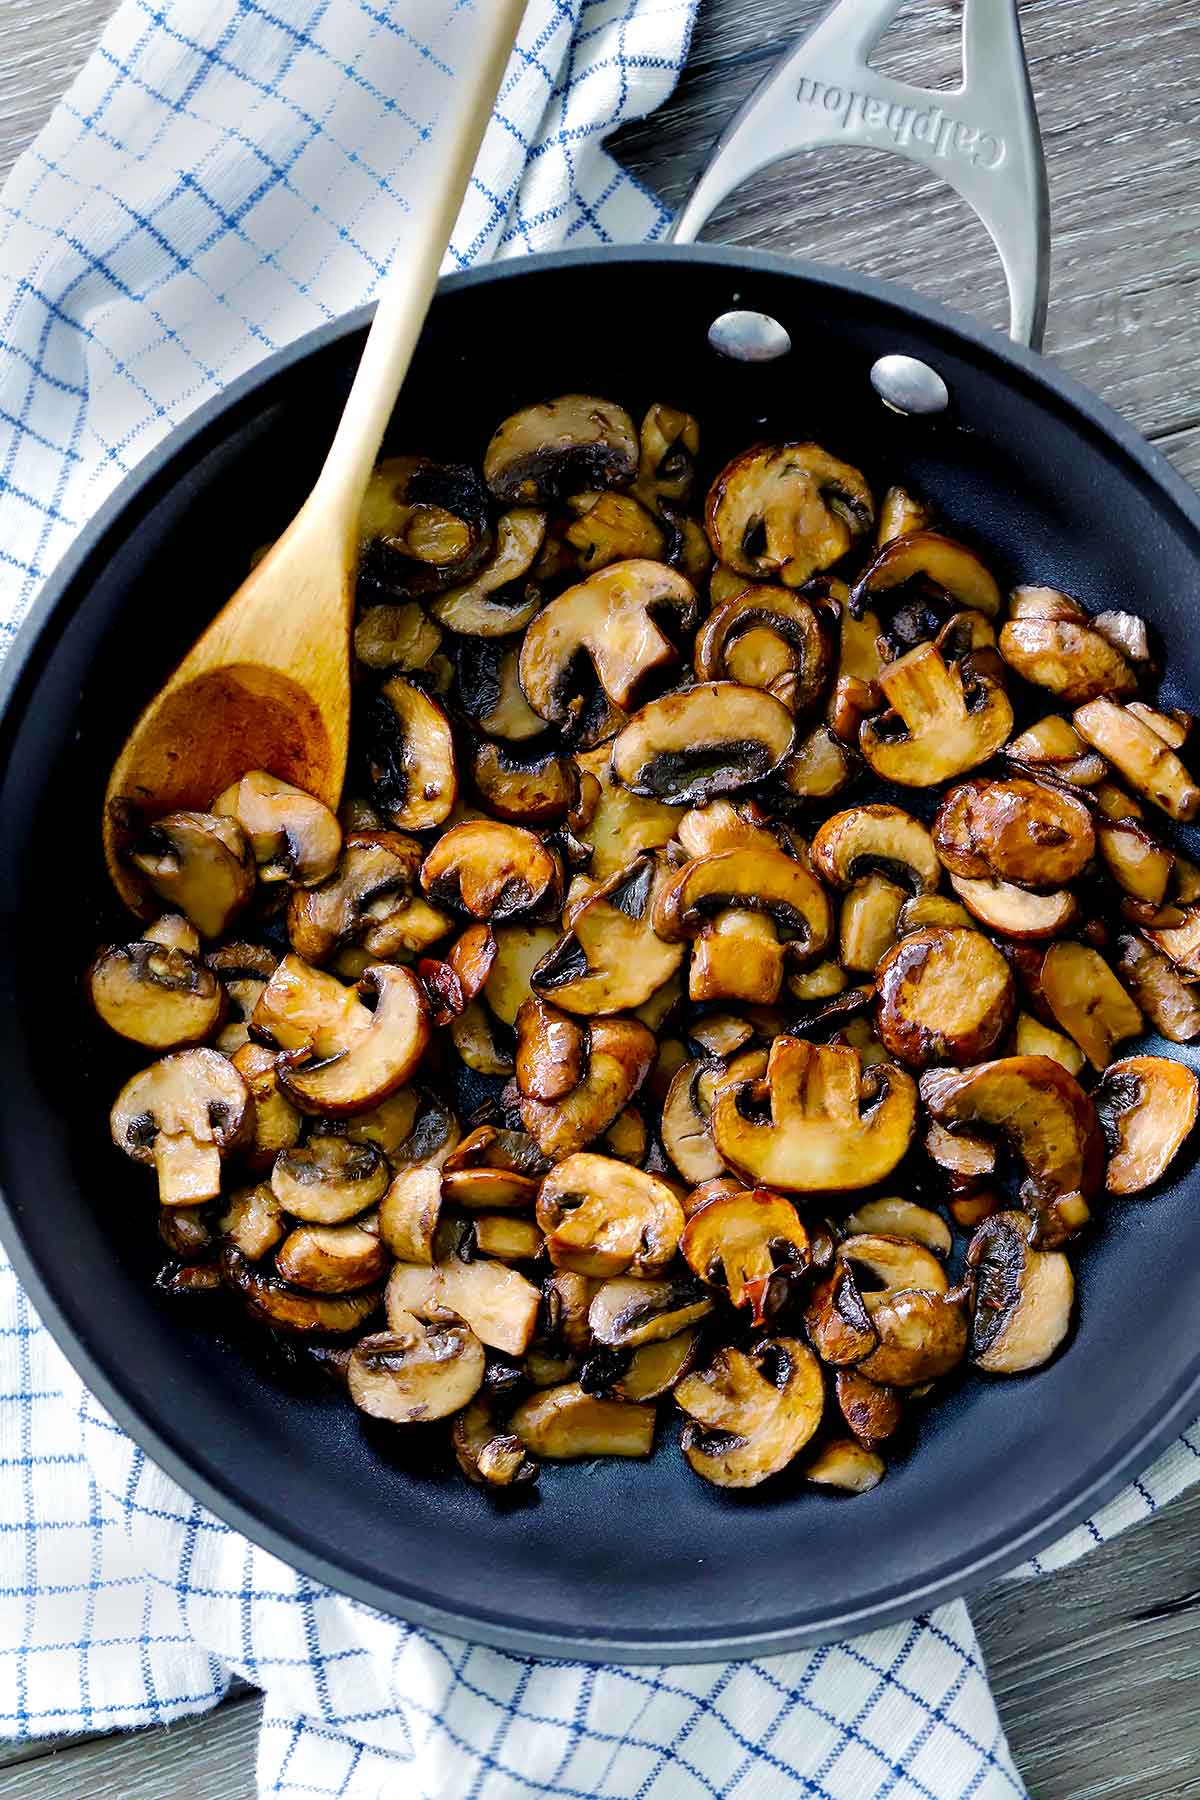 A skillet with sautéed mushrooms and a wooden spoon on a plaid towel.